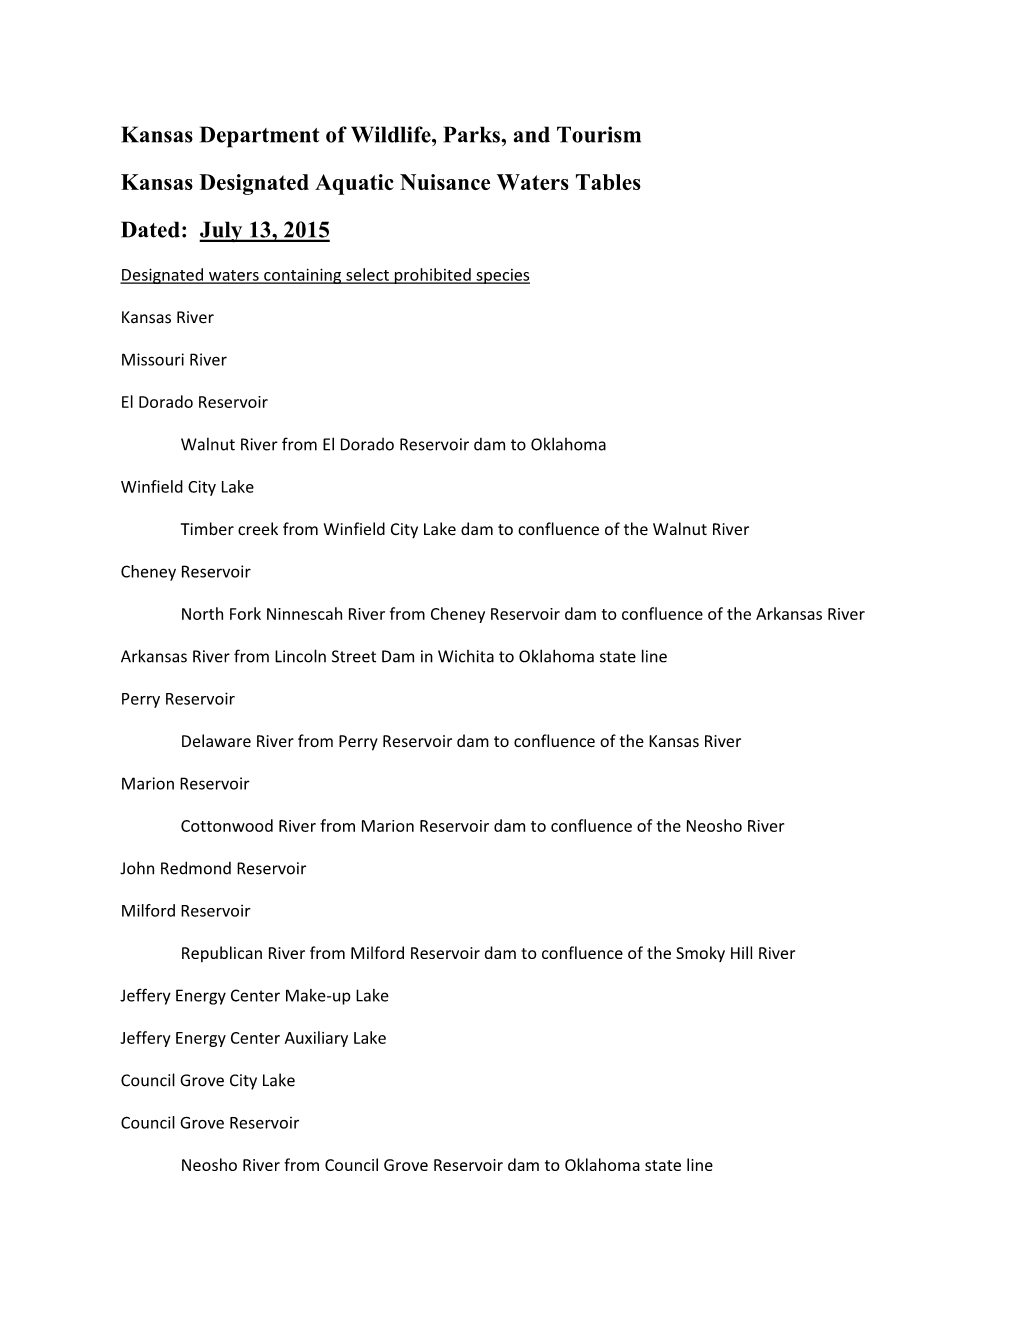 Kansas Department of Wildlife, Parks, and Tourism Kansas Designated Aquatic Nuisance Waters Tables Dated: July 13, 2015